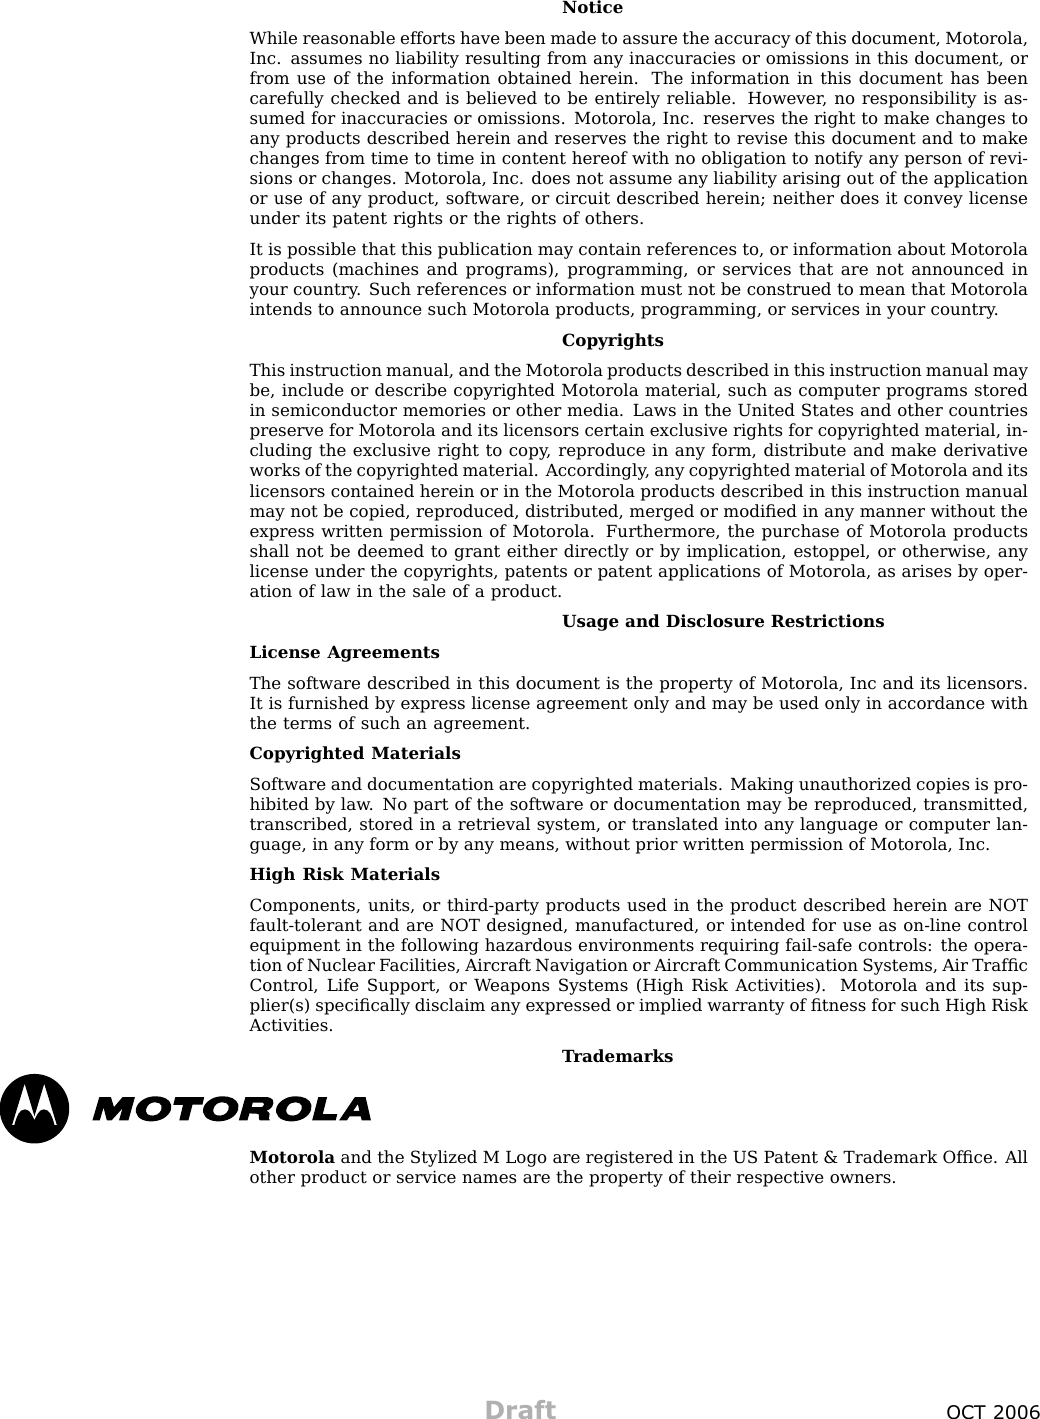 NoticeWhile reasonable efforts have been made to assure the accuracy of this document, Motorola,Inc. assumes no liability resulting from any inaccuracies or omissions in this document, orfrom use of the information obtained herein. The information in this document has beencarefully checked and is believed to be entirely reliable. However , no responsibility is as-sumed for inaccuracies or omissions. Motorola, Inc. reserves the right to make changes toany products described herein and reserves the right to revise this document and to makechanges from time to time in content hereof with no obligation to notify any person of revi-sions or changes. Motorola, Inc. does not assume any liability arising out of the applicationor use of any product, software, or circuit described herein; neither does it convey licenseunder its patent rights or the rights of others.It is possible that this publication may contain references to, or information about Motorolaproducts (machines and programs), programming, or services that are not announced inyour country . Such references or information must not be construed to mean that Motorolaintends to announce such Motorola products, programming, or services in your country .CopyrightsThis instruction manual, and the Motorola products described in this instruction manual maybe, include or describe copyrighted Motorola material, such as computer programs storedin semiconductor memories or other media. Laws in the United States and other countriespreserve for Motorola and its licensors certain exclusive rights for copyrighted material, in-cluding the exclusive right to copy , reproduce in any form, distribute and make derivativeworks of the copyrighted material. Accordingly , any copyrighted material of Motorola and itslicensors contained herein or in the Motorola products described in this instruction manualmay not be copied, reproduced, distributed, merged or modiﬁed in any manner without theexpress written permission of Motorola. Furthermore, the purchase of Motorola productsshall not be deemed to grant either directly or by implication, estoppel, or otherwise, anylicense under the copyrights, patents or patent applications of Motorola, as arises by oper-ation of law in the sale of a product.Usage and Disclosure RestrictionsLicense AgreementsThe software described in this document is the property of Motorola, Inc and its licensors.It is furnished by express license agreement only and may be used only in accordance withthe terms of such an agreement.Copyrighted MaterialsSoftware and documentation are copyrighted materials. Making unauthorized copies is pro-hibited by law . No part of the software or documentation may be reproduced, transmitted,transcribed, stored in a retrieval system, or translated into any language or computer lan-guage, in any form or by any means, without prior written permission of Motorola, Inc.High Risk MaterialsComponents, units, or third -party products used in the product described herein are NOTfault -tolerant and are NOT designed, manufactured, or intended for use as on -line controlequipment in the following hazardous environments requiring fail -safe controls: the opera-tion of Nuclear F acilities, Aircraft Navigation or Aircraft Communication Systems, Air TrafﬁcControl, Life Support, or W eapons Systems (High Risk Activities). Motorola and its sup-plier(s) speciﬁcally disclaim any expressed or implied warranty of ﬁtness for such High RiskActivities.T rademarksMotorola and the Stylized M Logo are registered in the US P atent &amp; Trademark Ofﬁce. Allother product or service names are the property of their respective owners.Draft OCT 2006